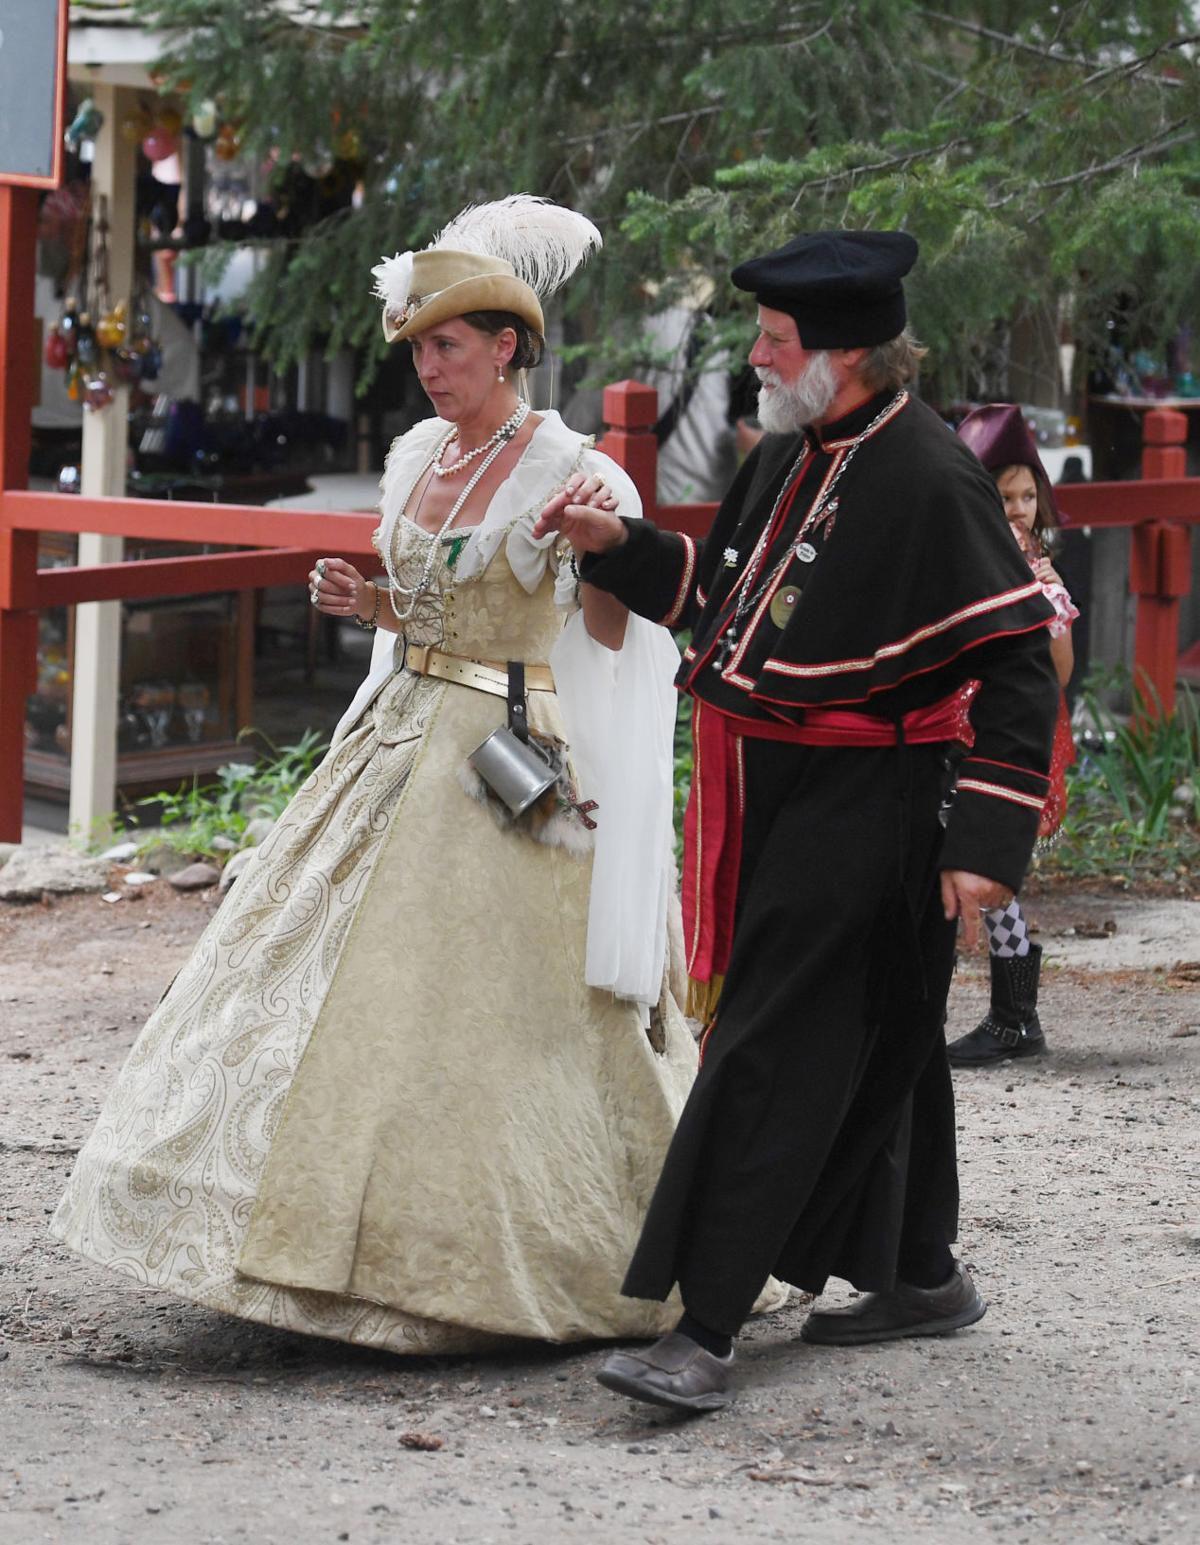 43rd year of Renaissance Festival set to kick off north of Colorado